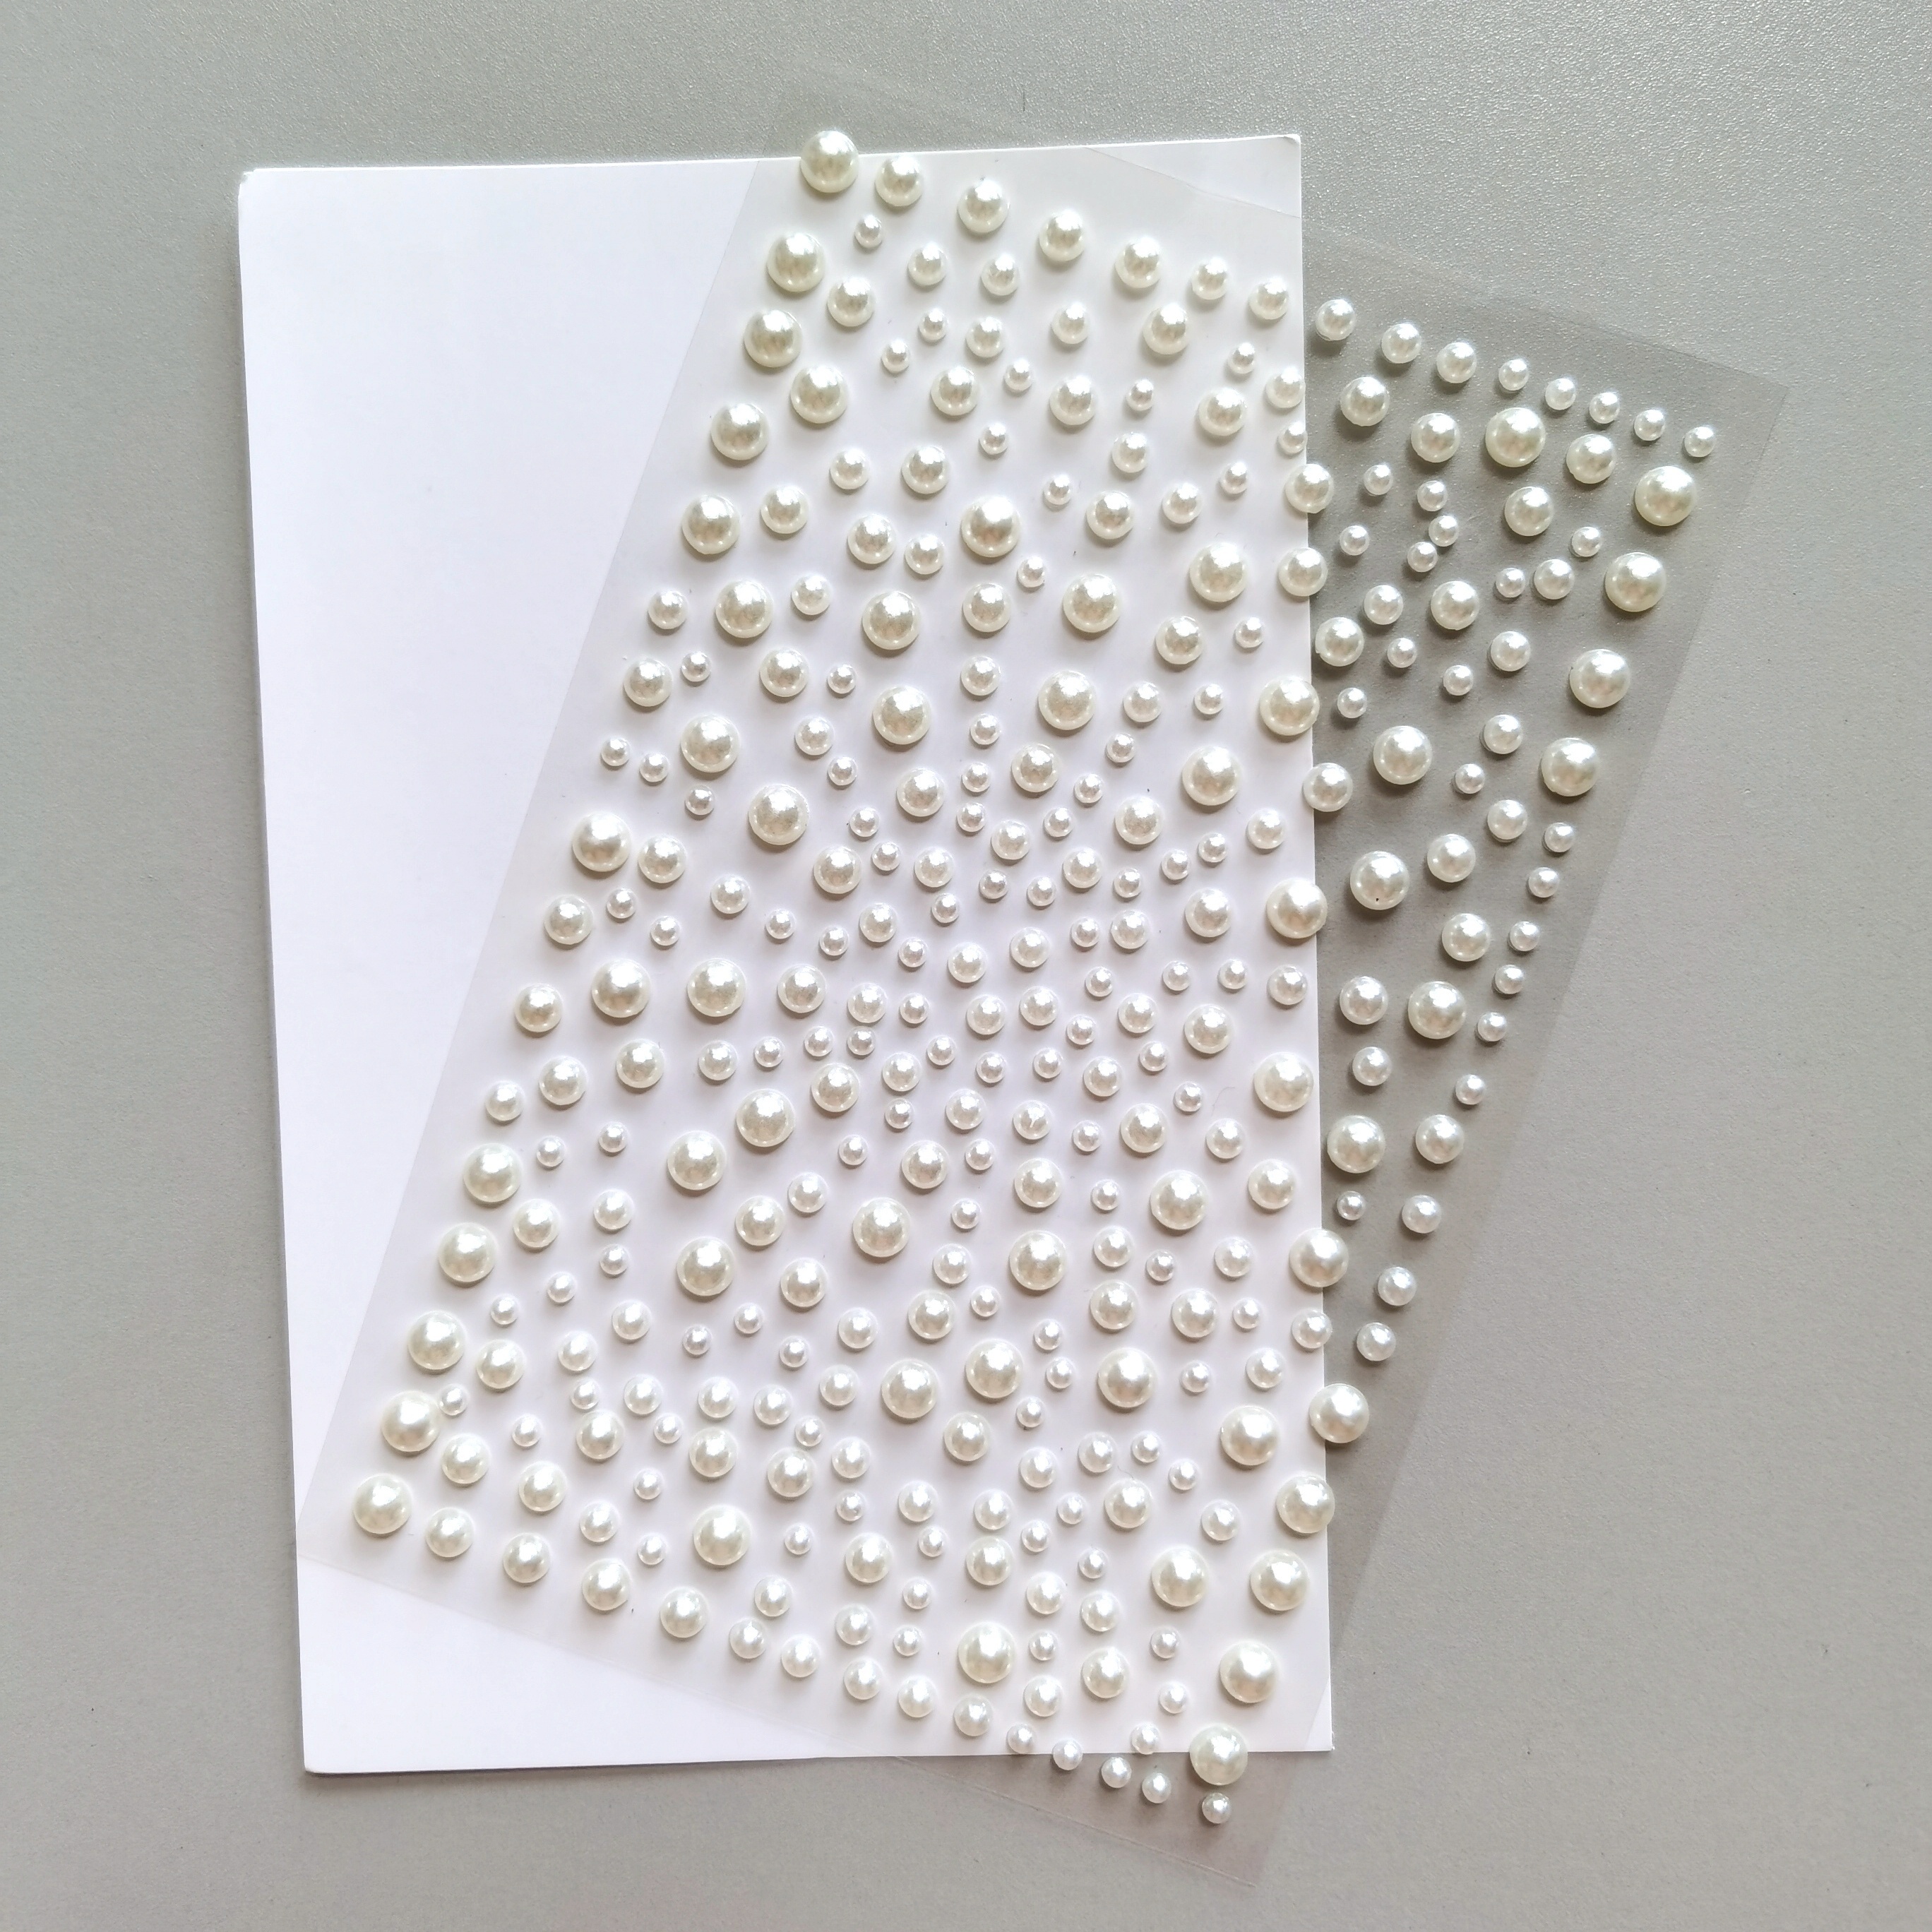 975 Pcs Of Pearl Stickers Self-Adhesive Decorative Stickers, DIY